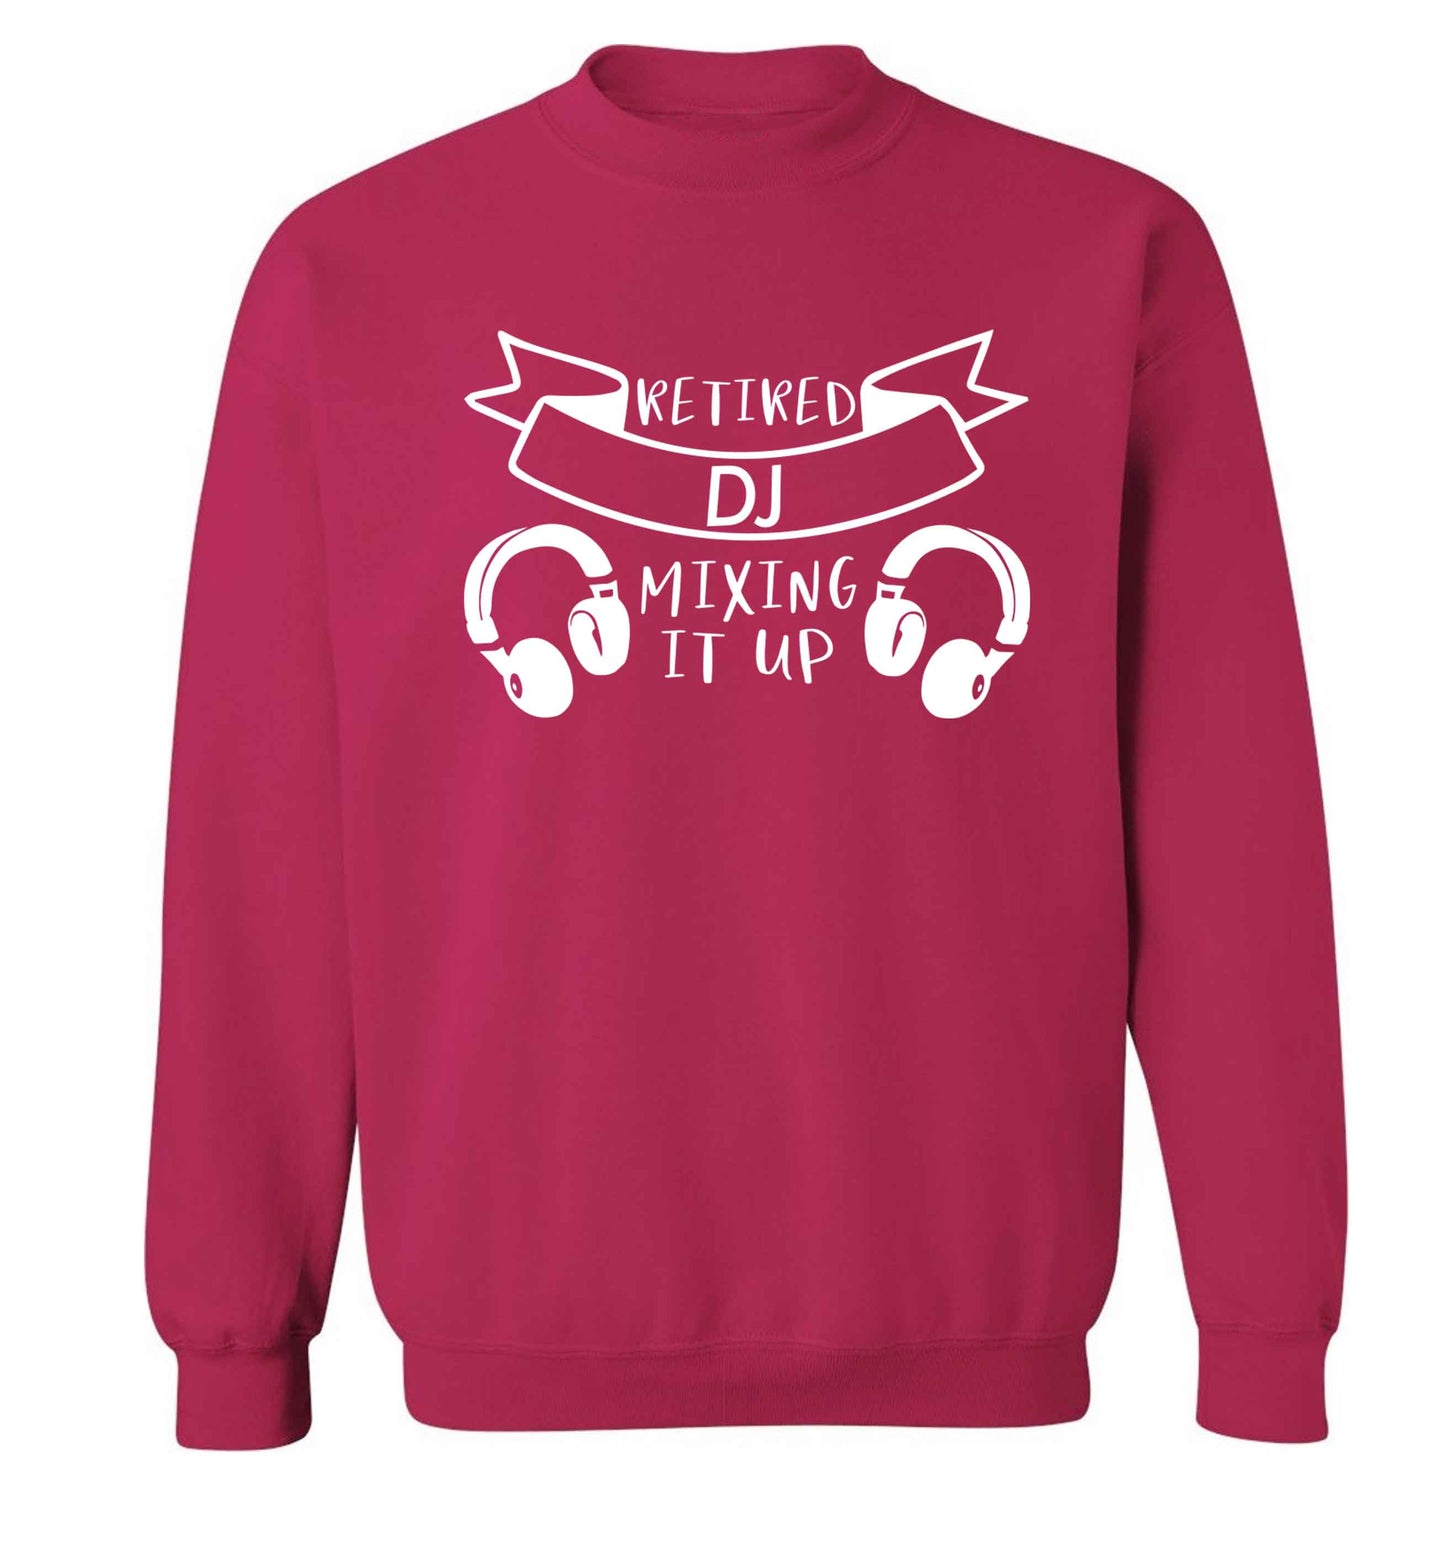 Retired DJ mixing it up Adult's unisex pink Sweater 2XL